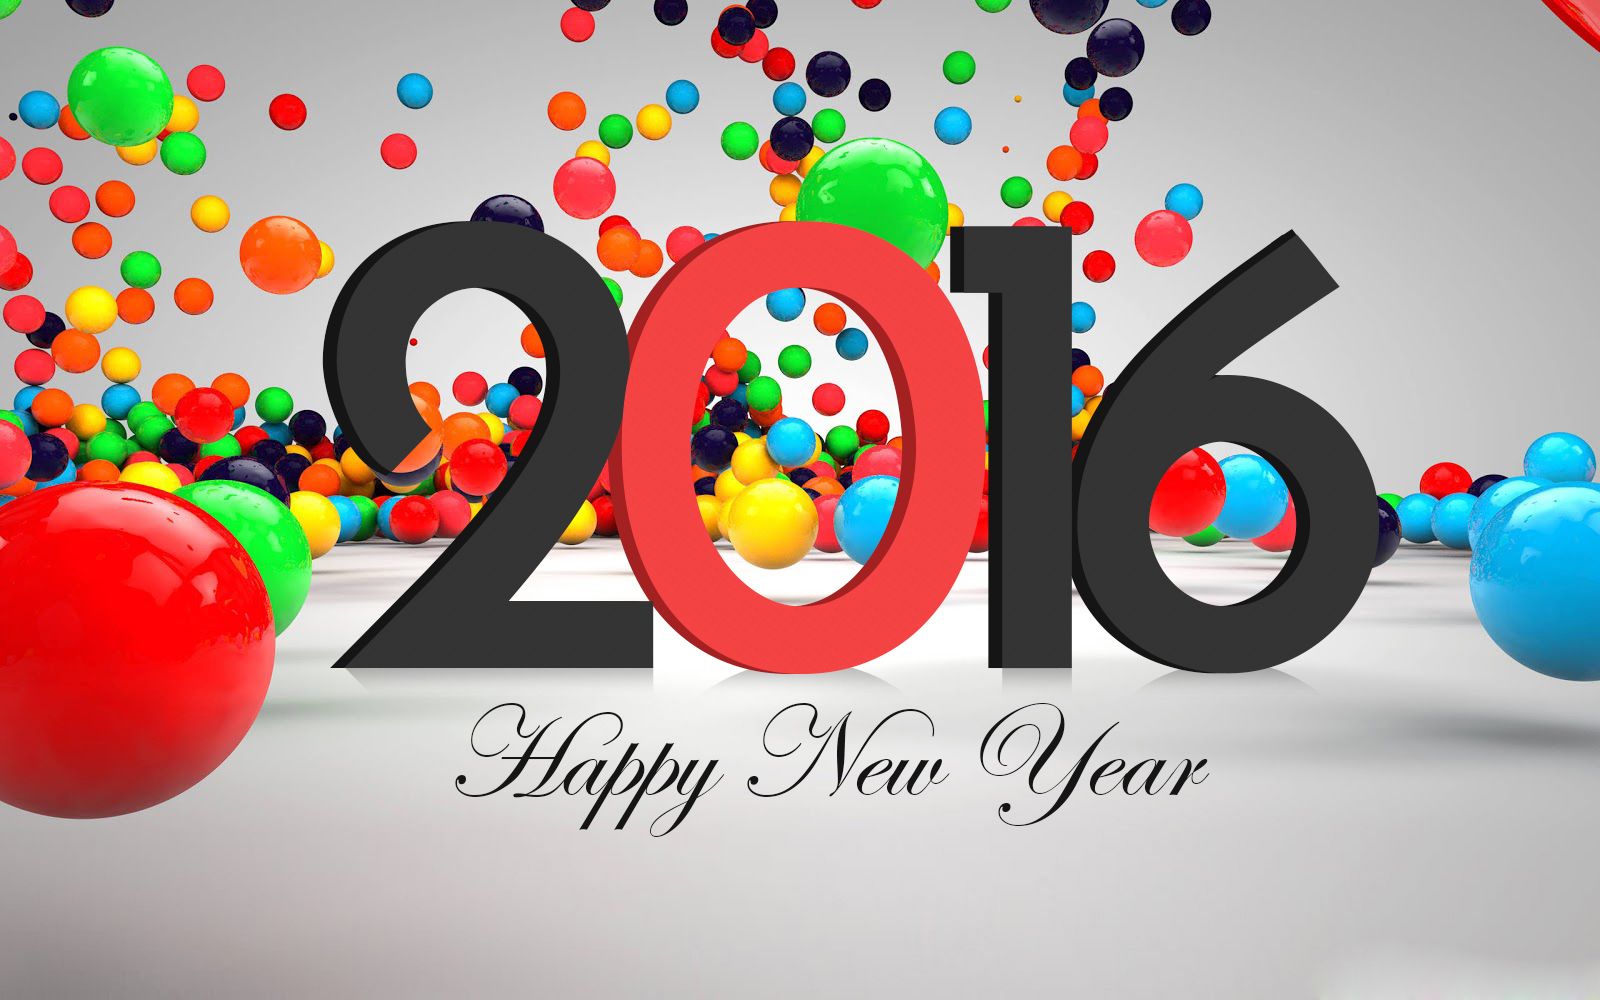 Happy New Year Wallpapers | New Year Desktop Backgrounds